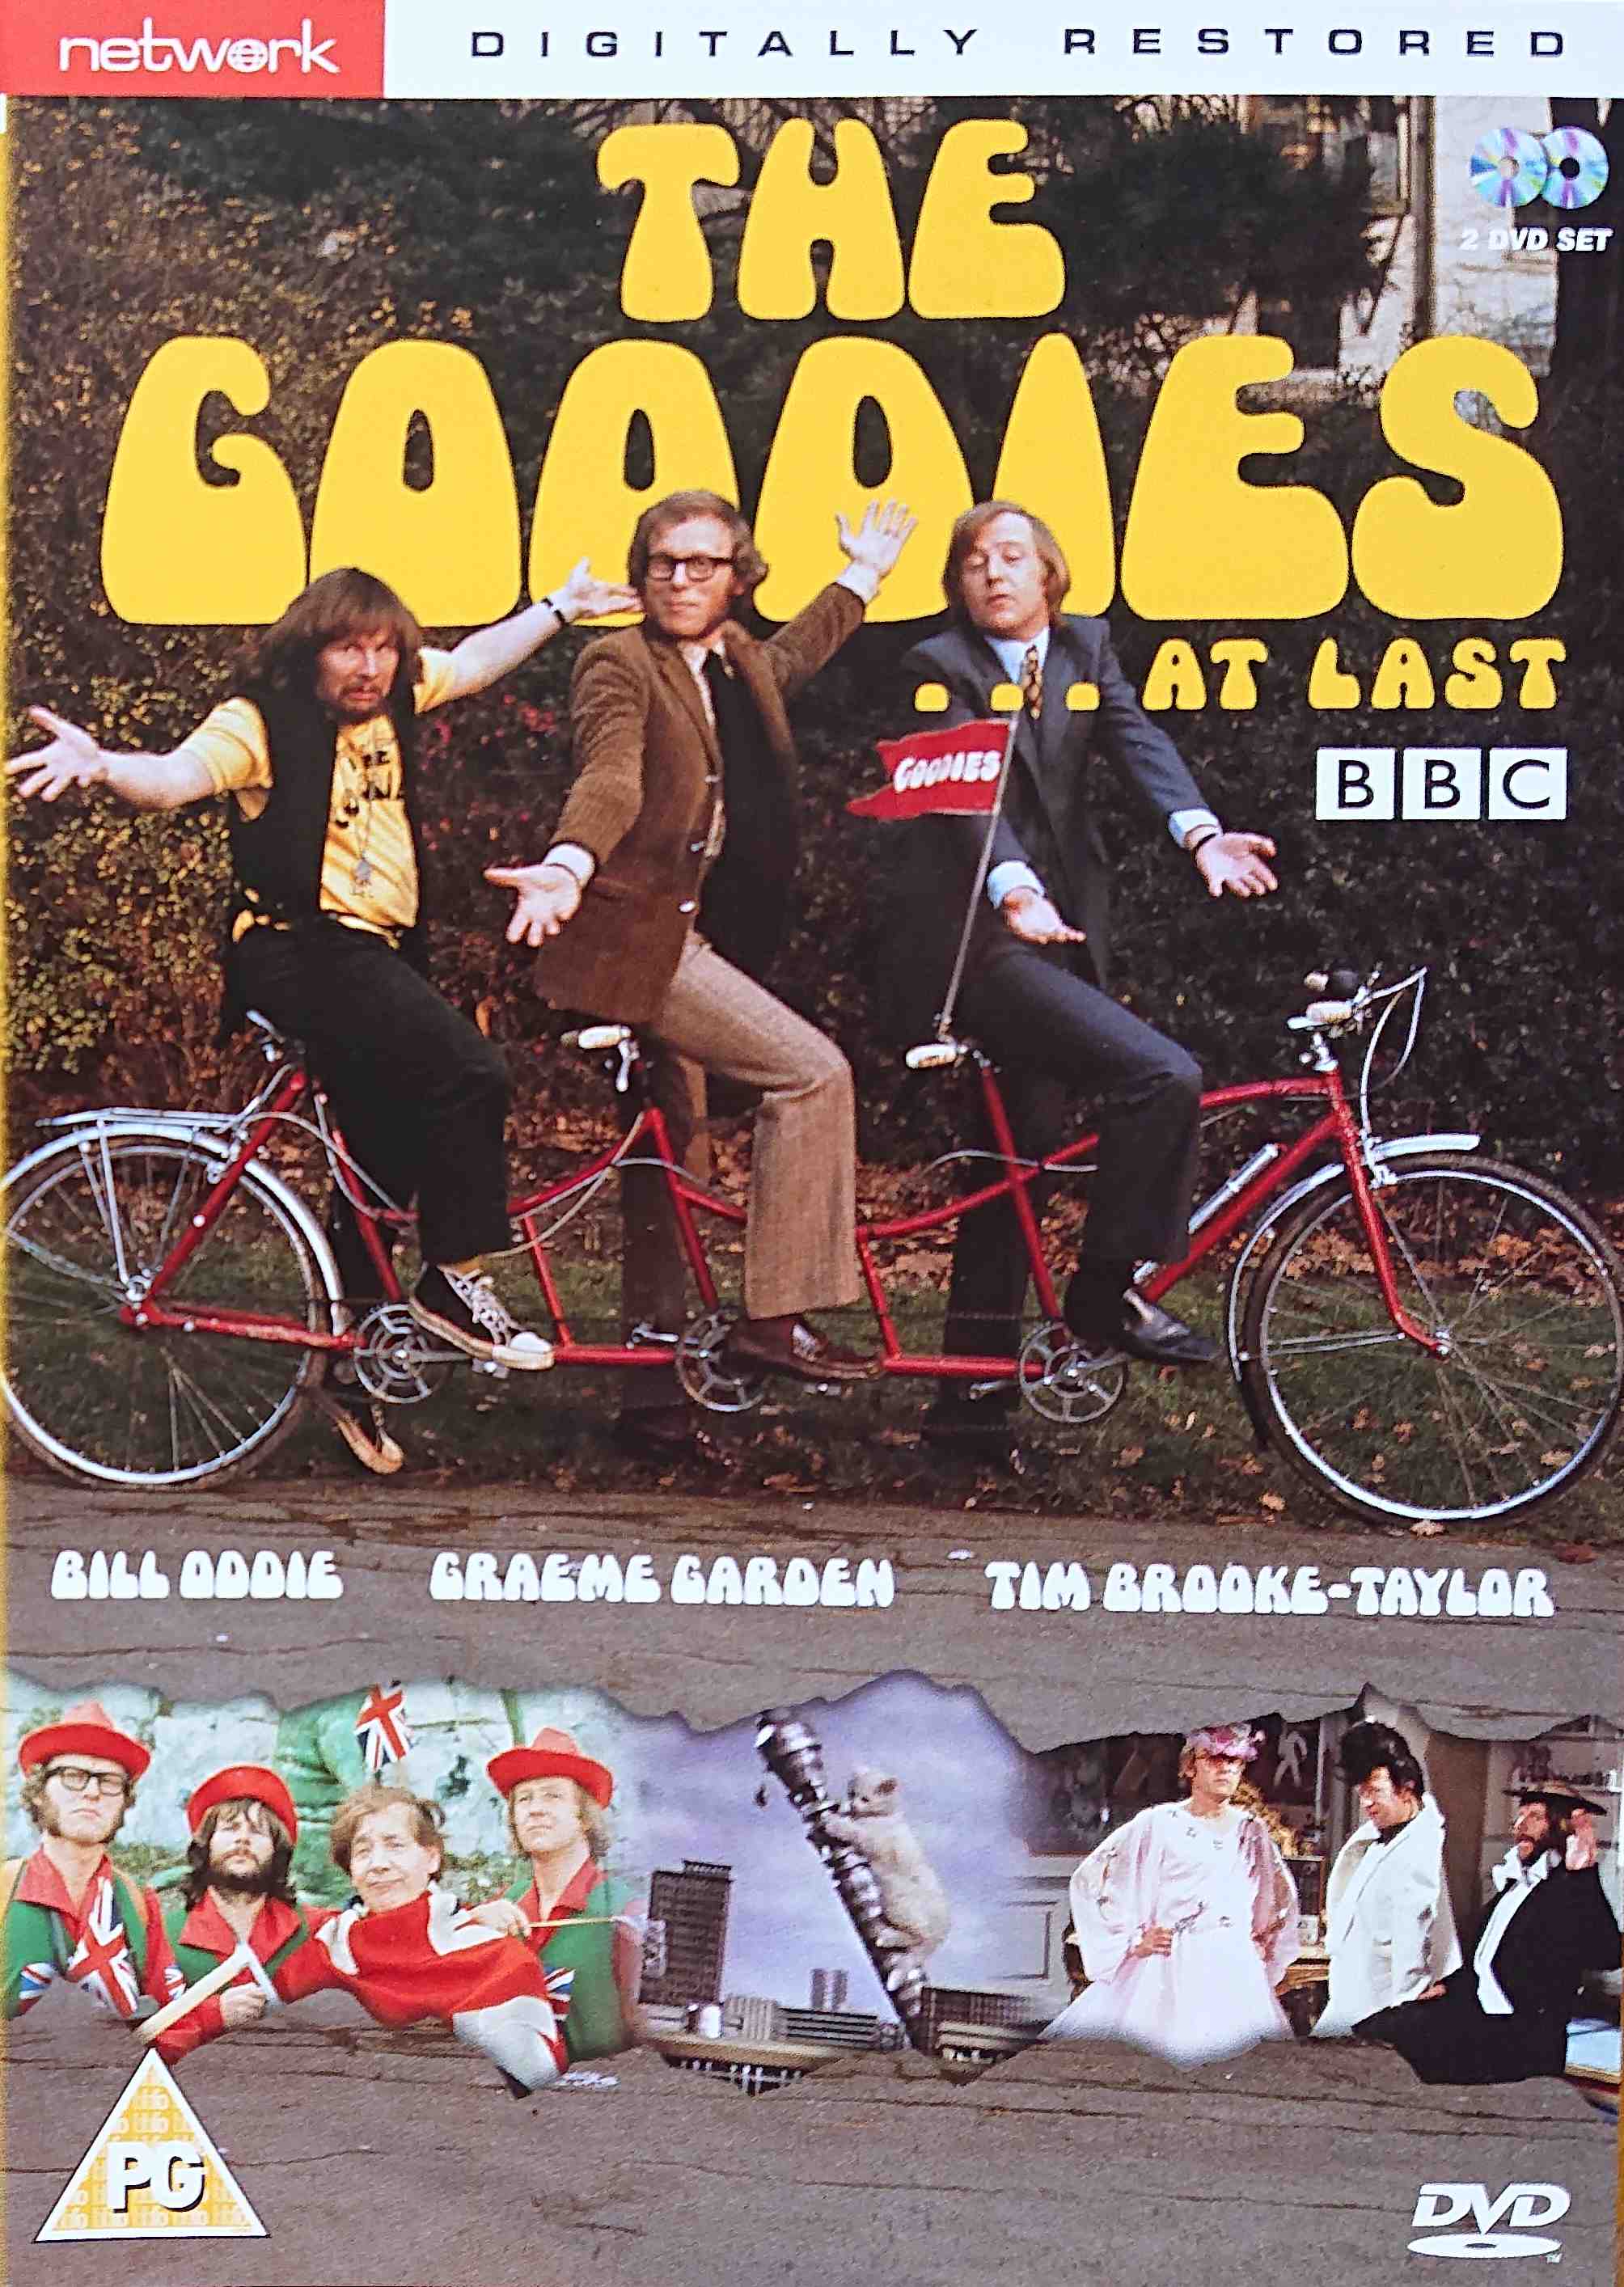 Picture of 7852171 The Goodies ... at last by artist Bill Oddie / Graeme Garden / Tim Brooke-Taylor from the BBC records and Tapes library